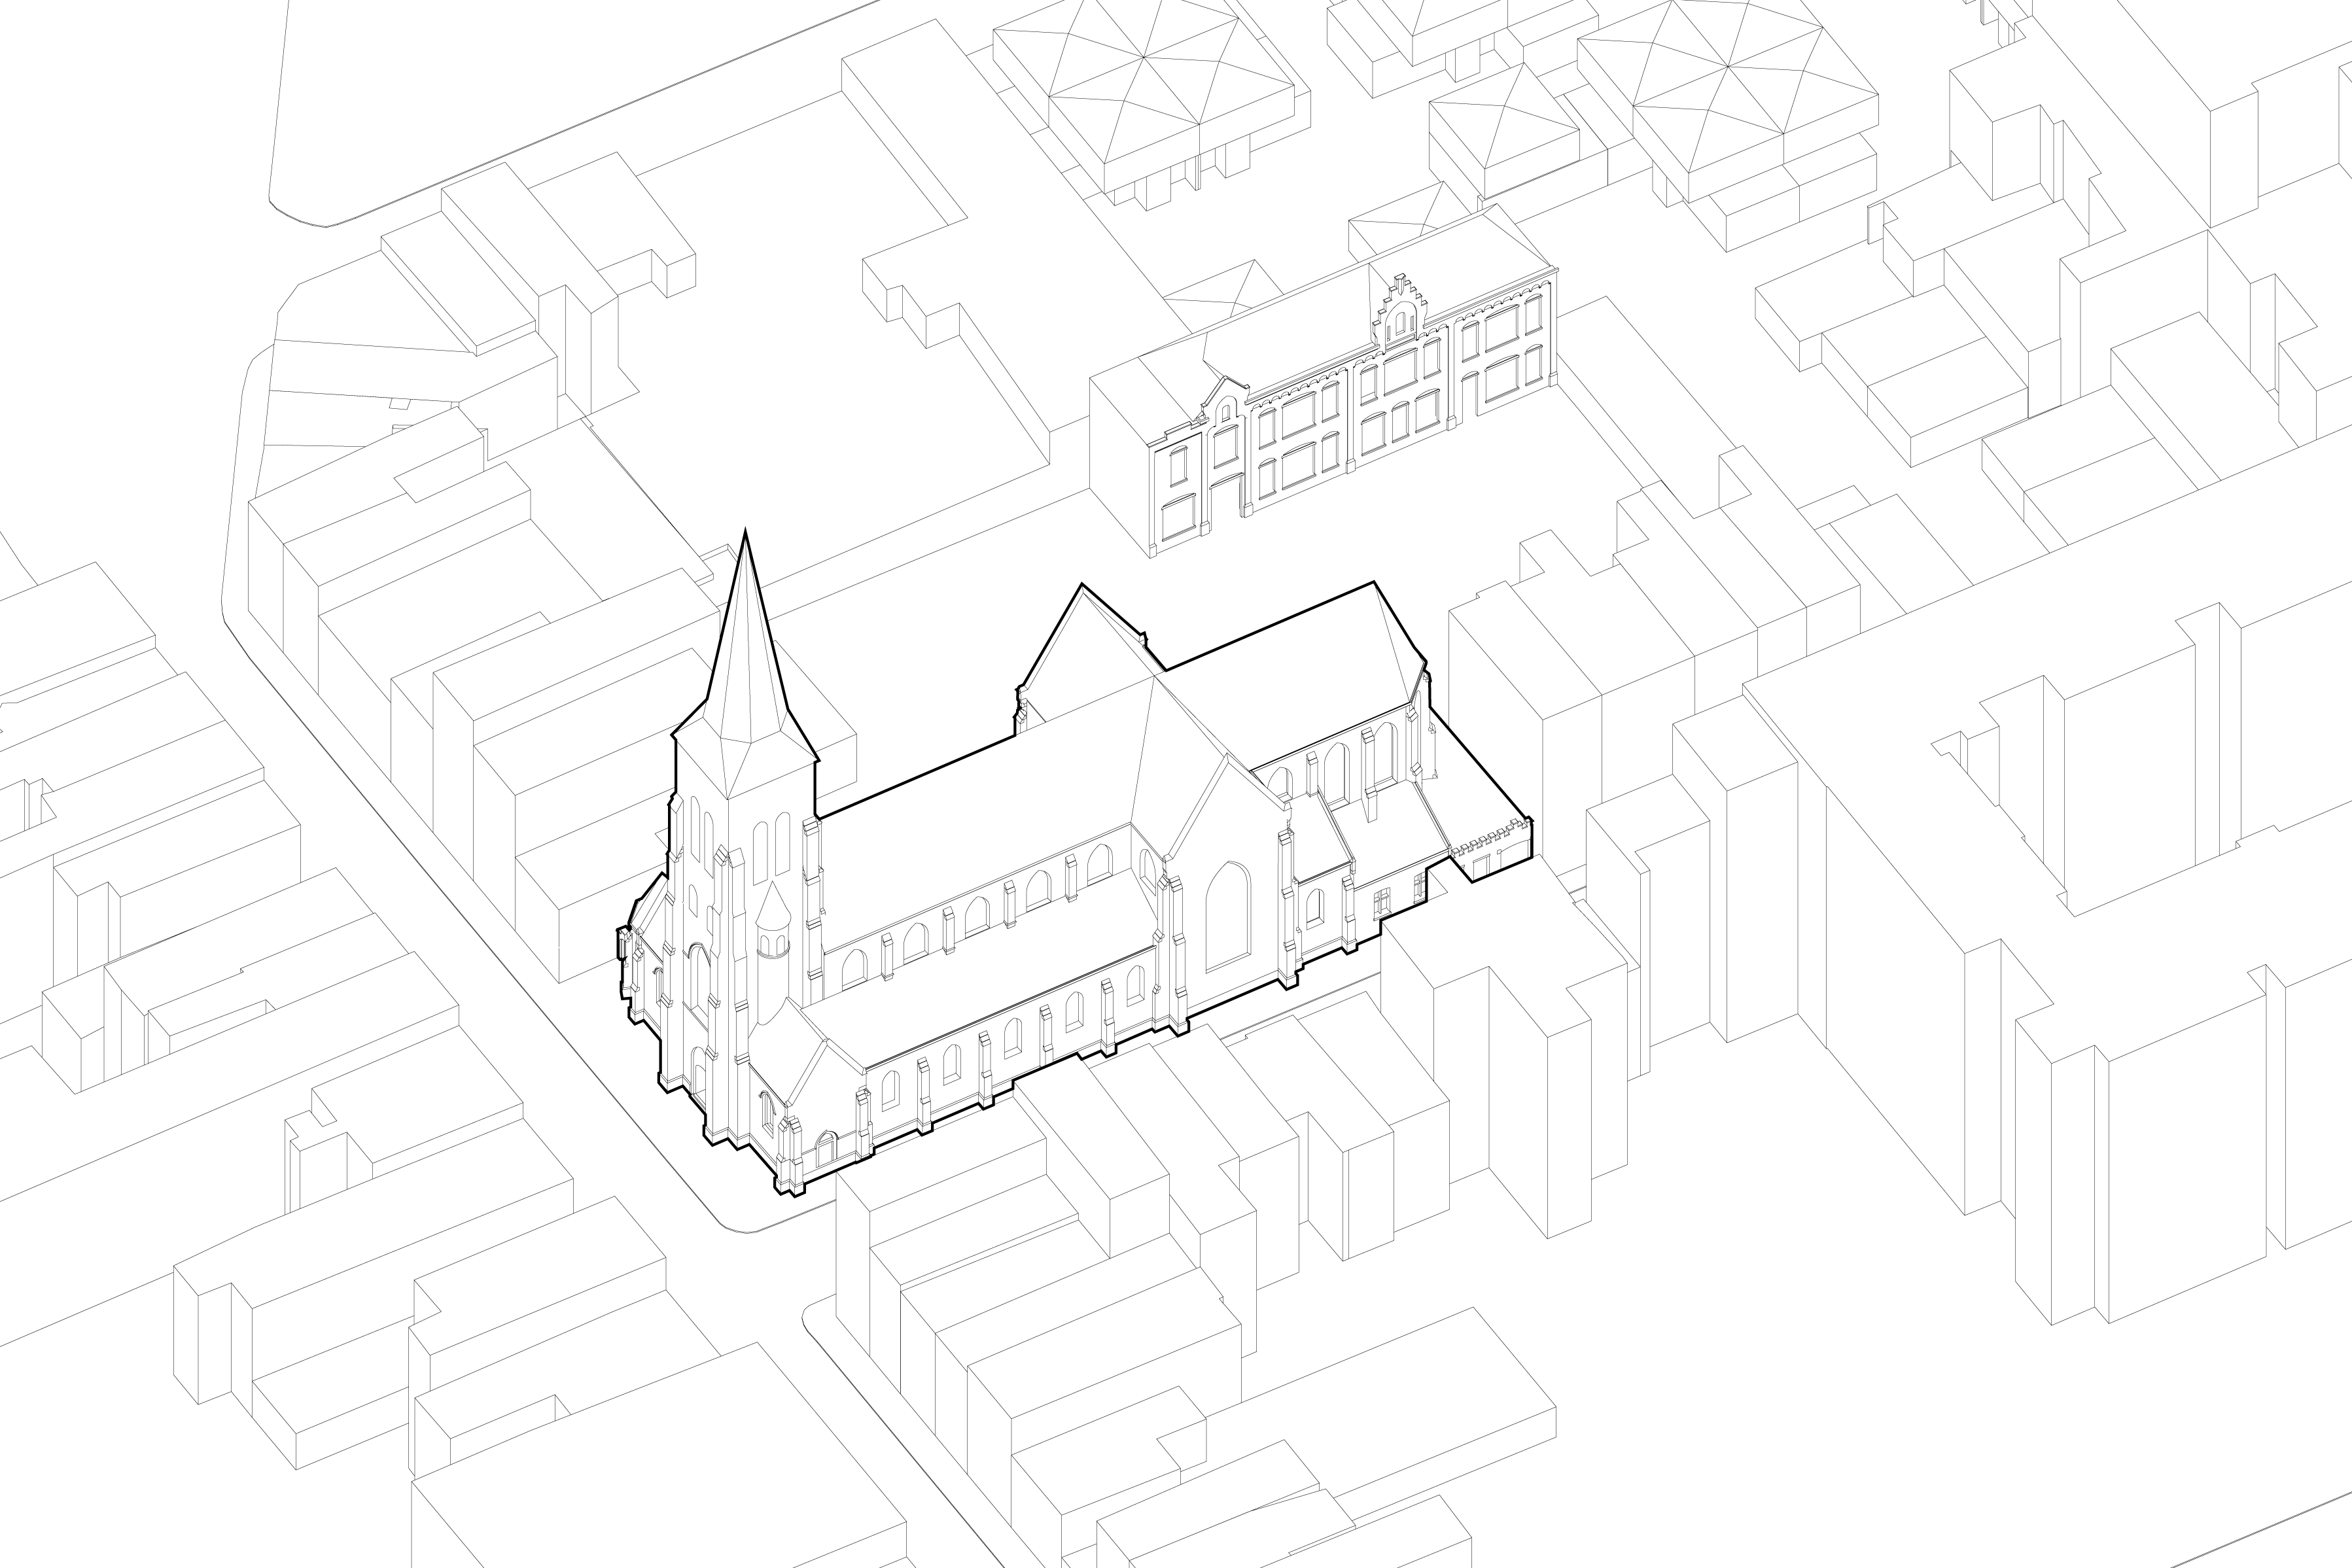 Feasibility study for the conversion of the Sint-Lambertus church